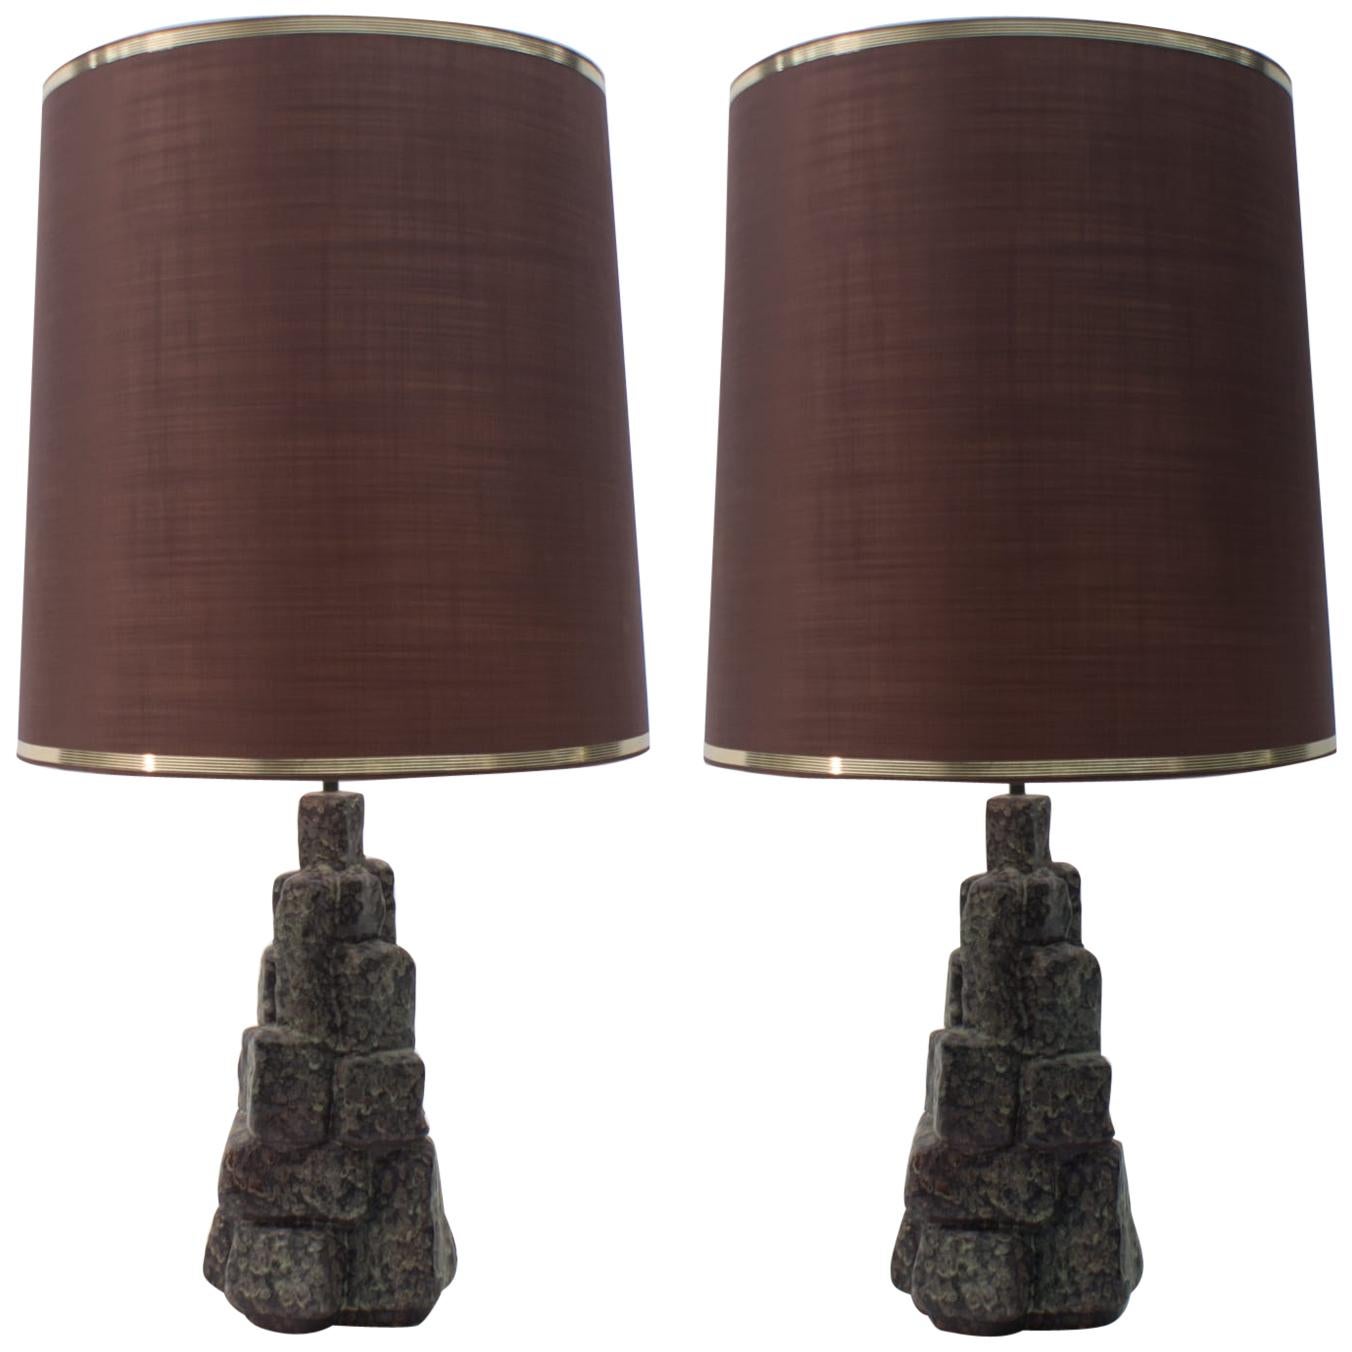 Pair of Large Ceramic Table Lamps in the Shape of Rocks, 1960s Italy